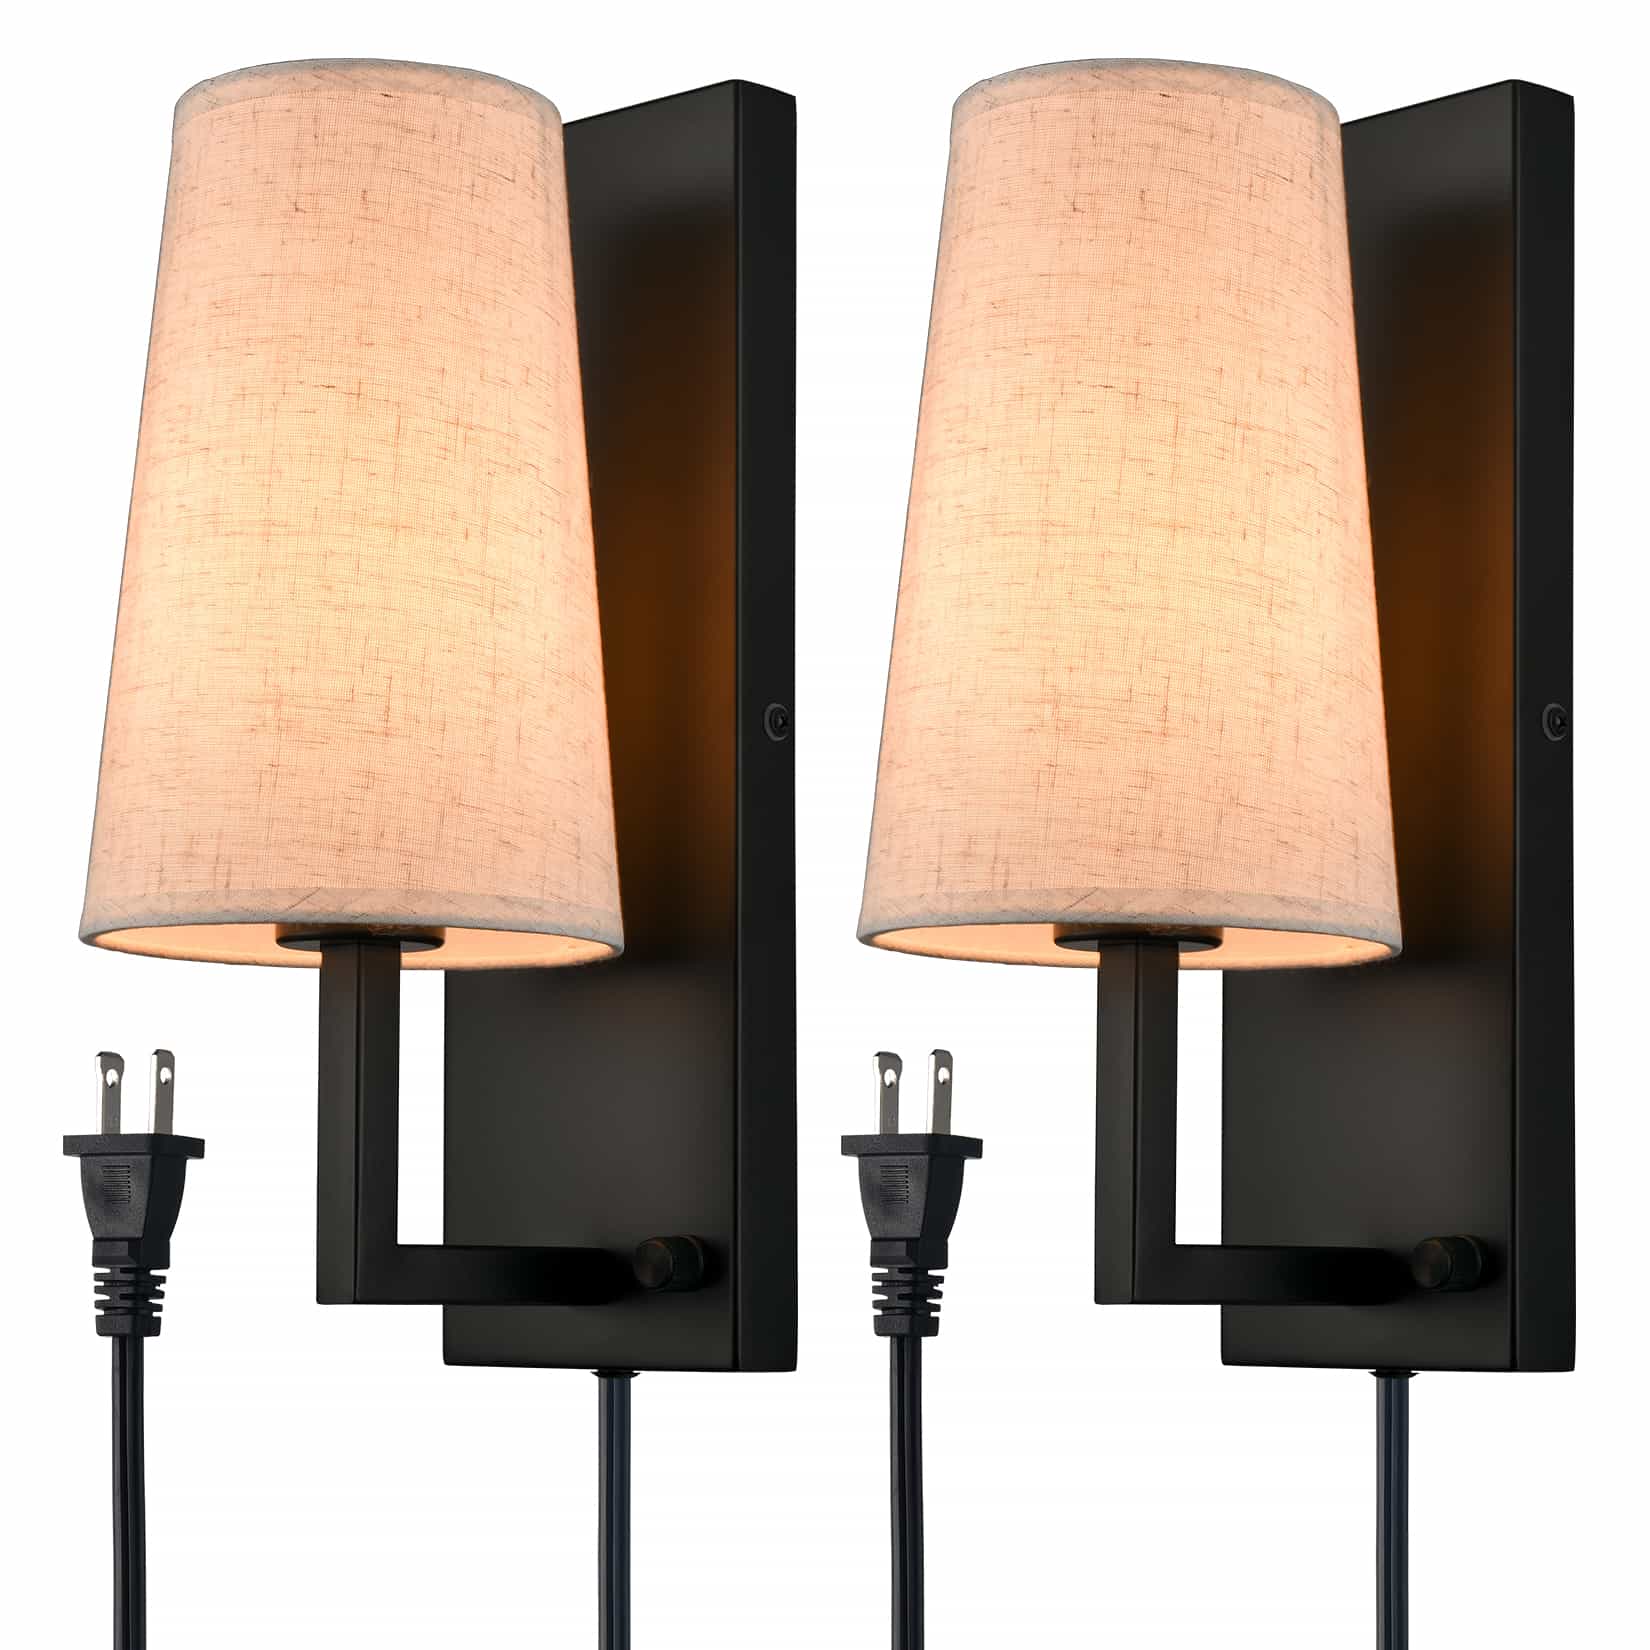 Black Plug in Wall Sconces Sets of Two Modern Fabric Shade Wall Lamps